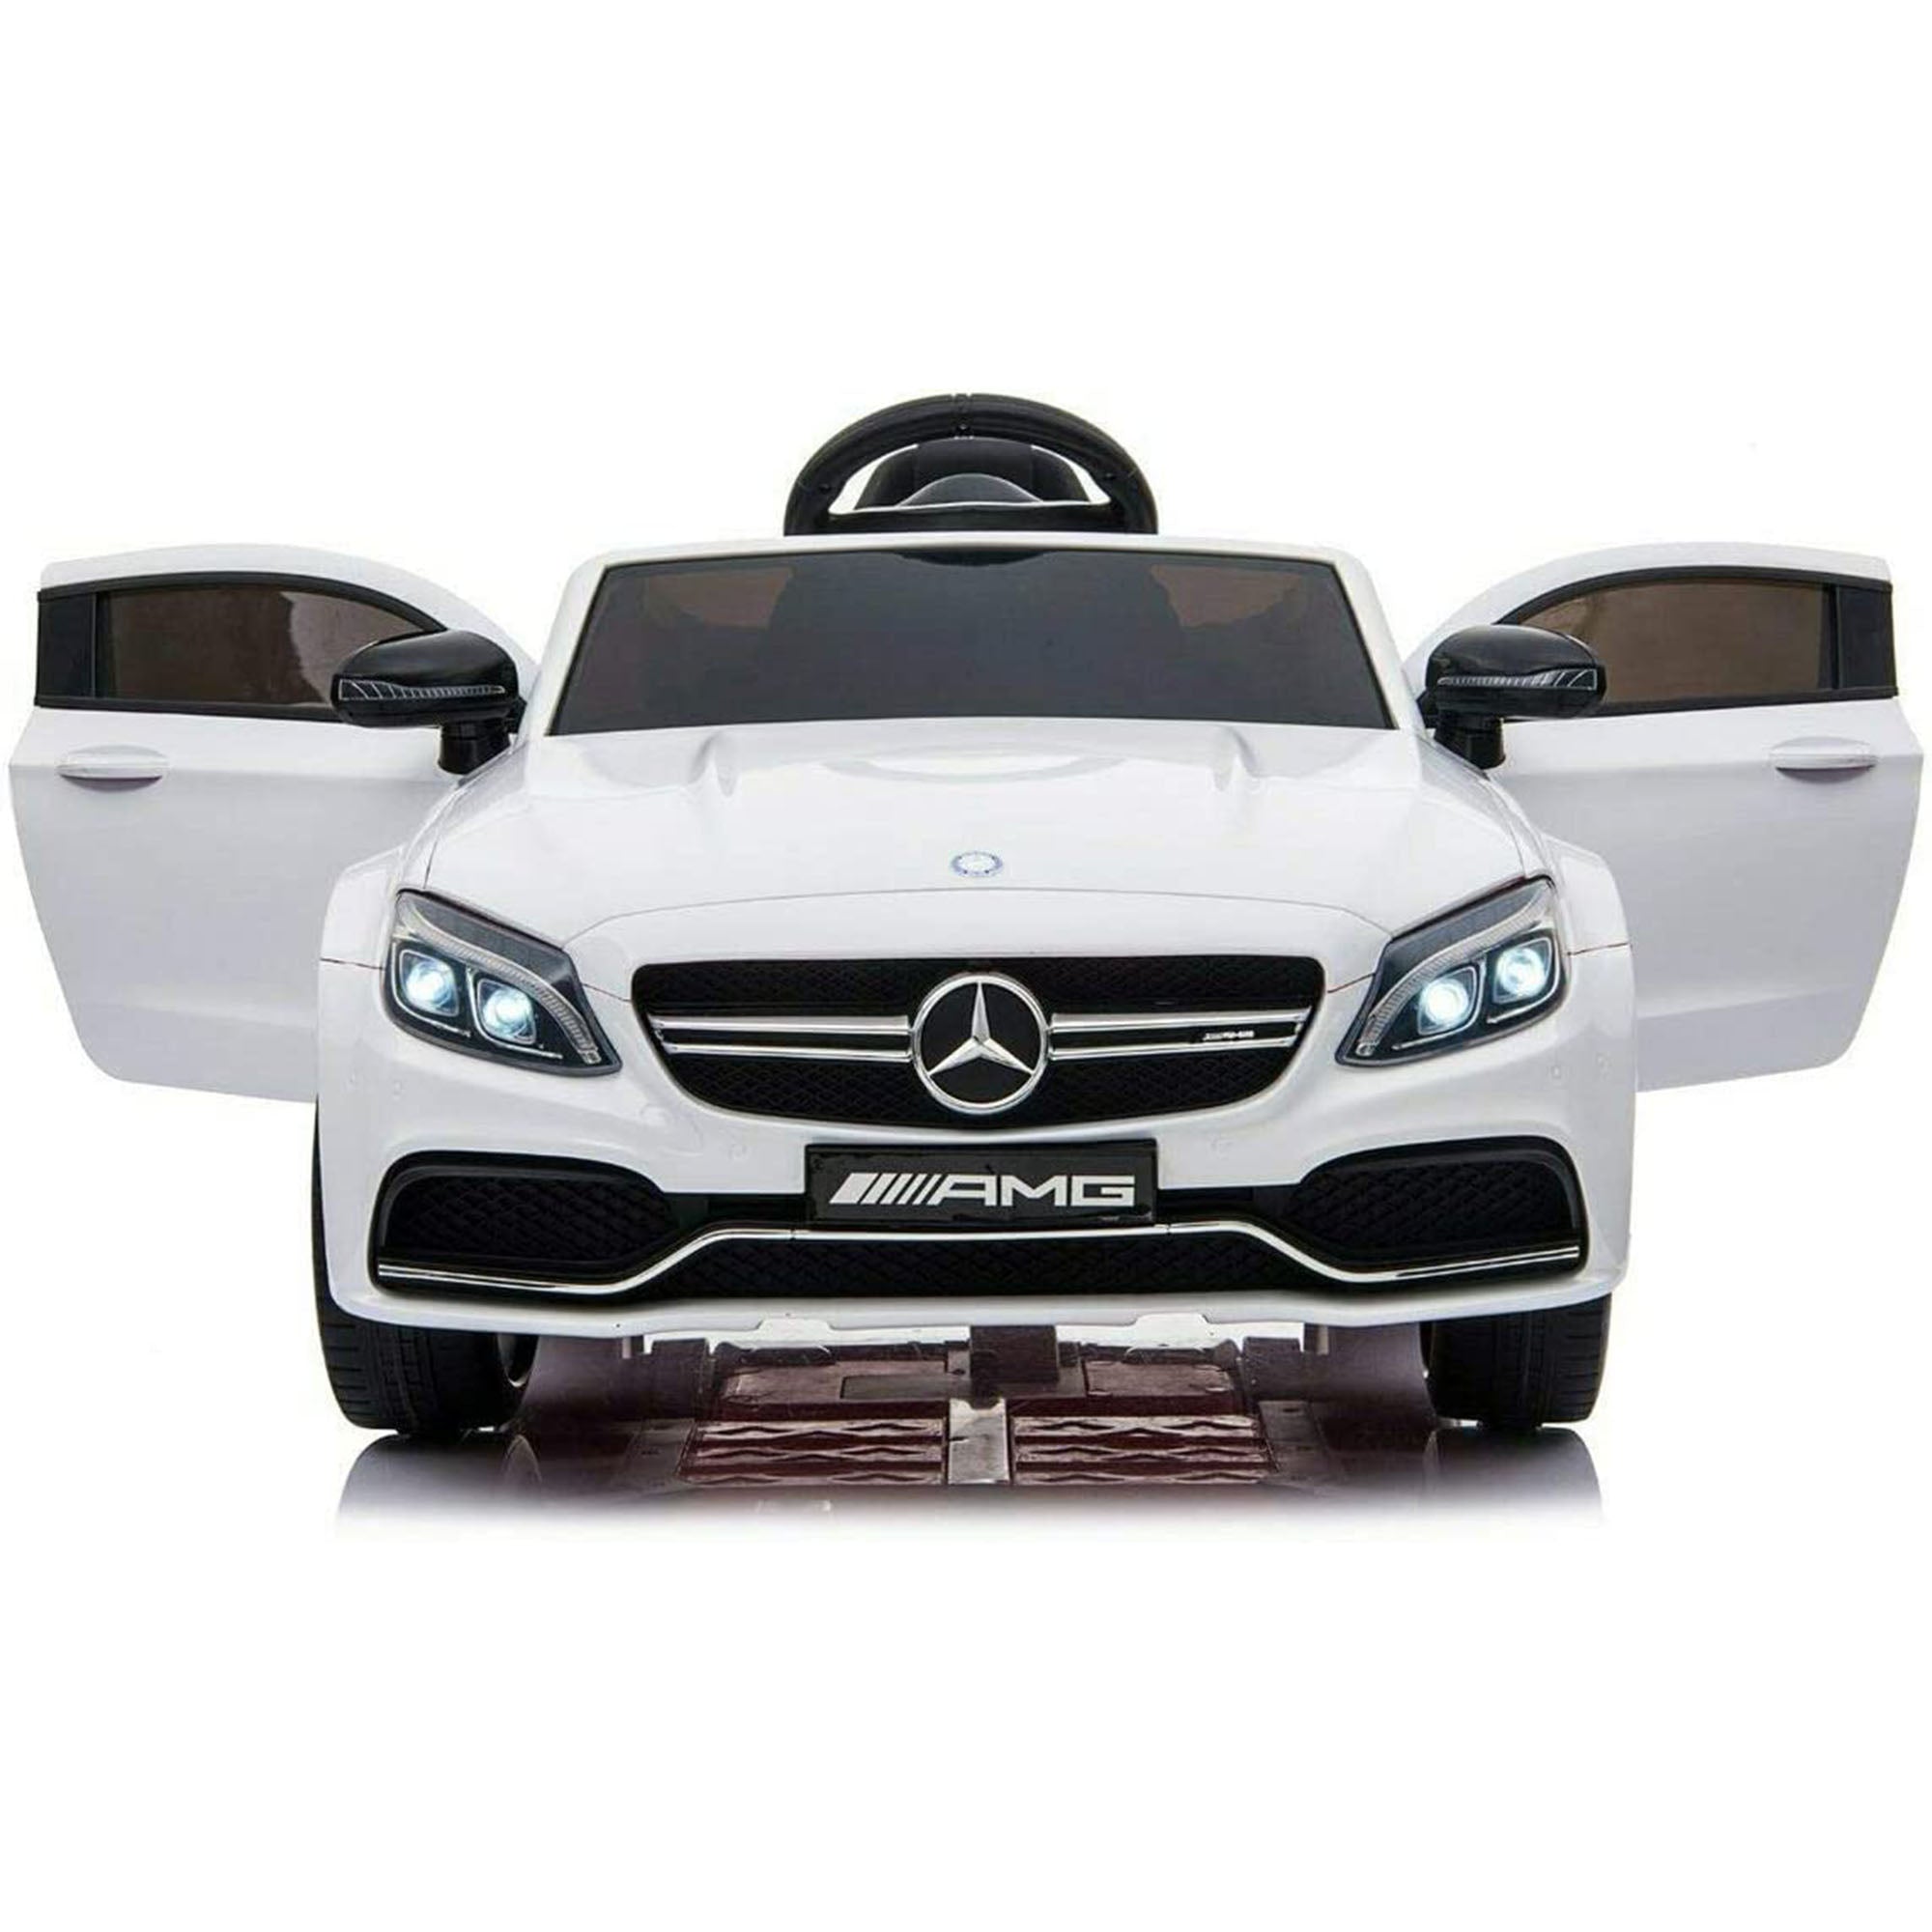 Ride On Cars For Kids C63 AMG White